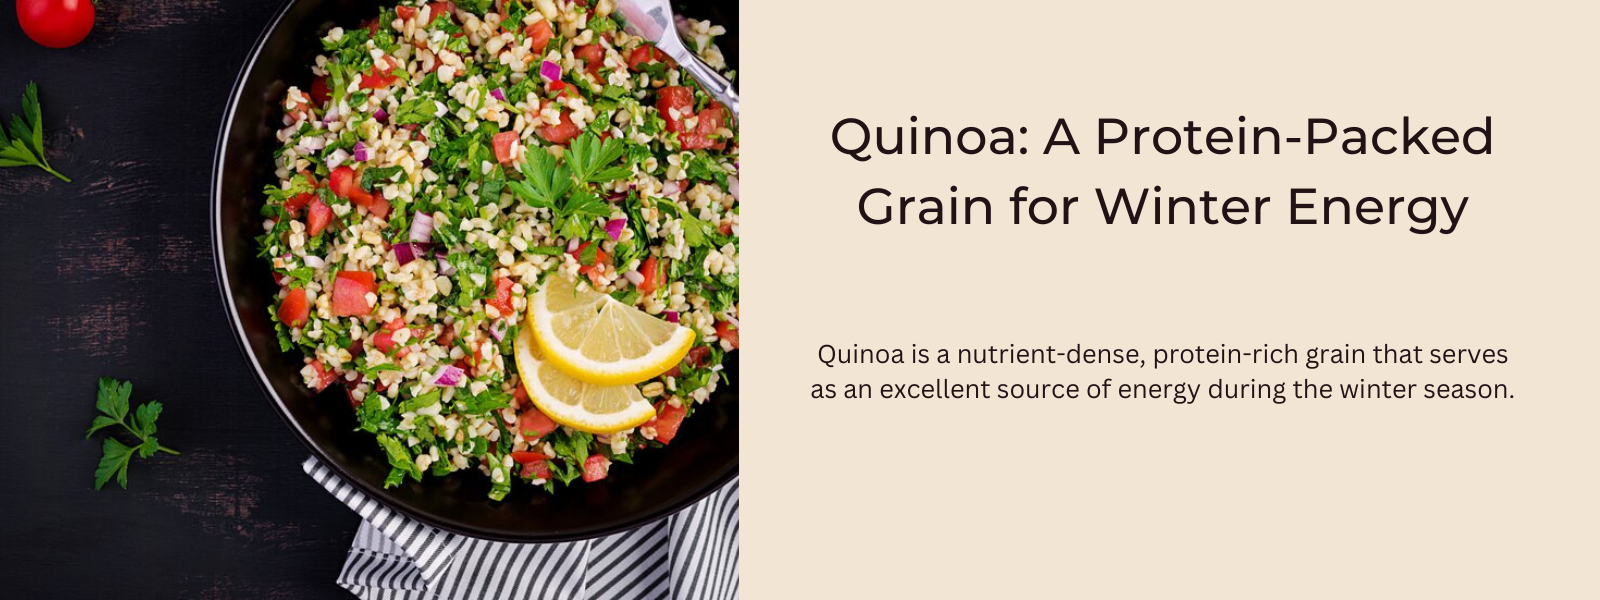 Quinoa: A Protein-Packed Grain for Winter Energy